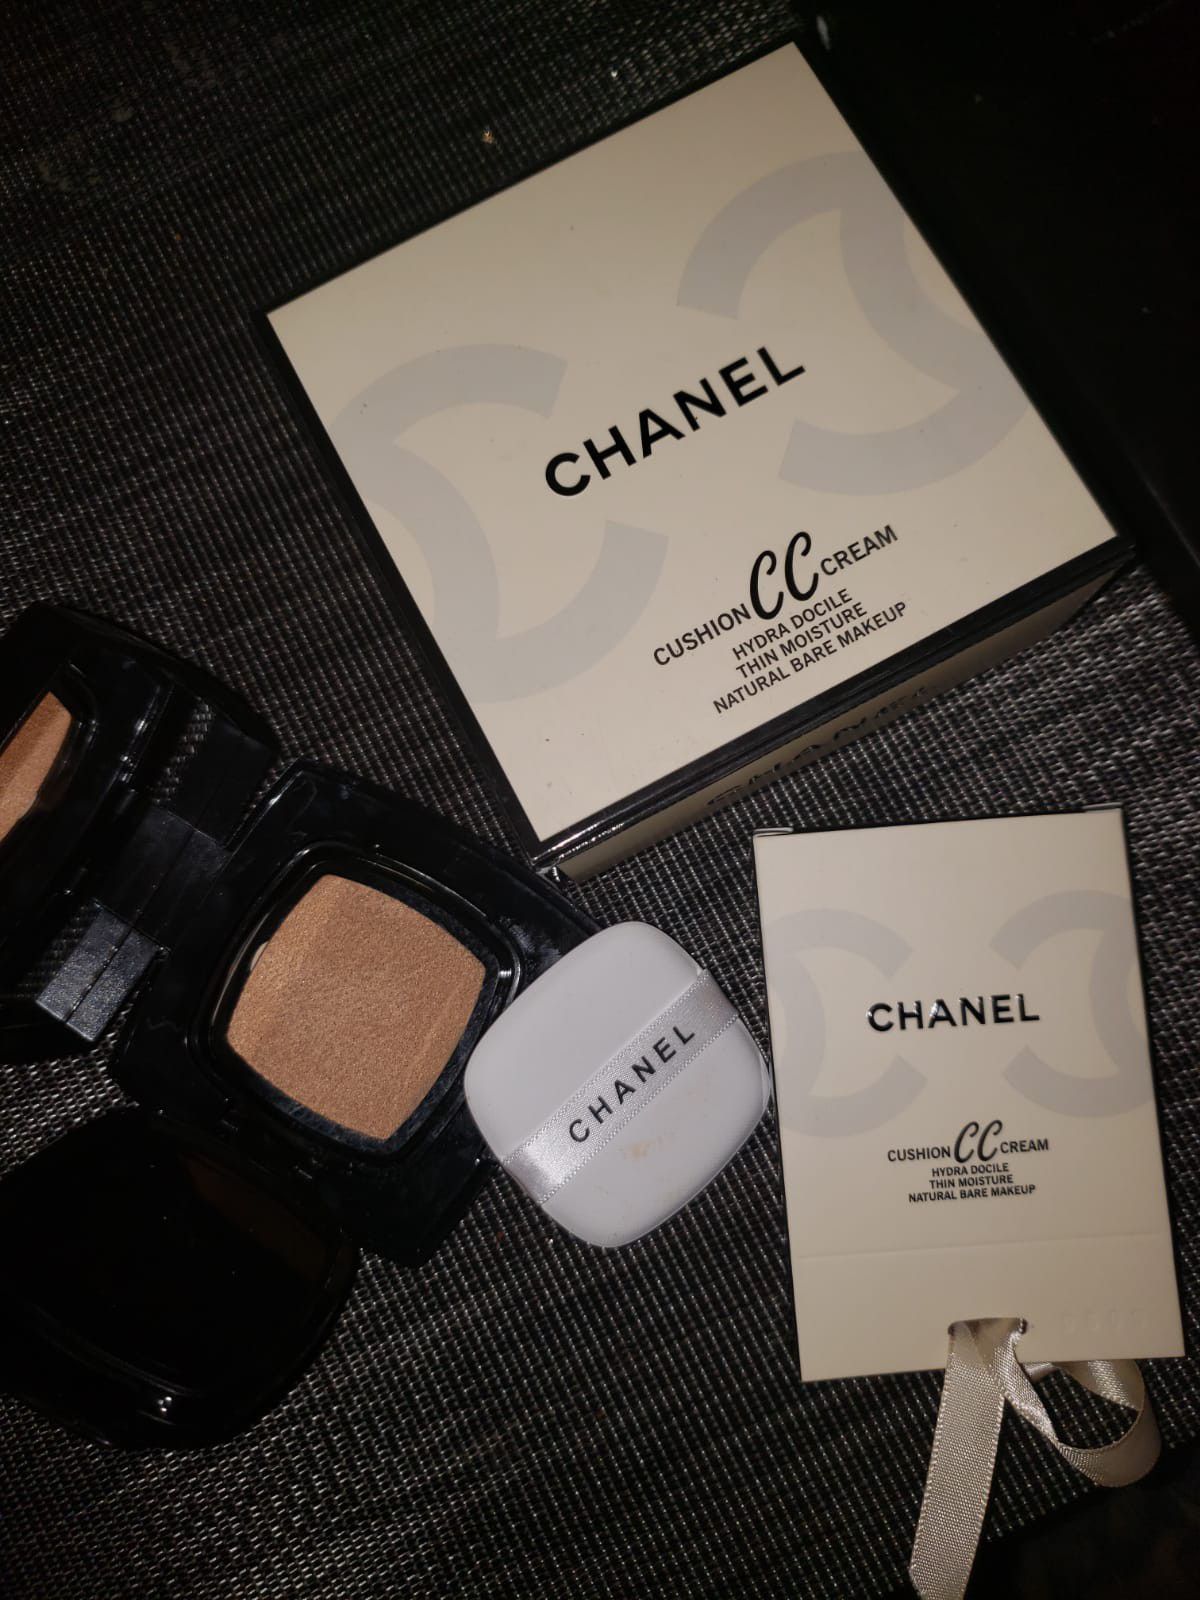 Chanel cushion cc cream for Sale in Los Angeles, CA - OfferUp